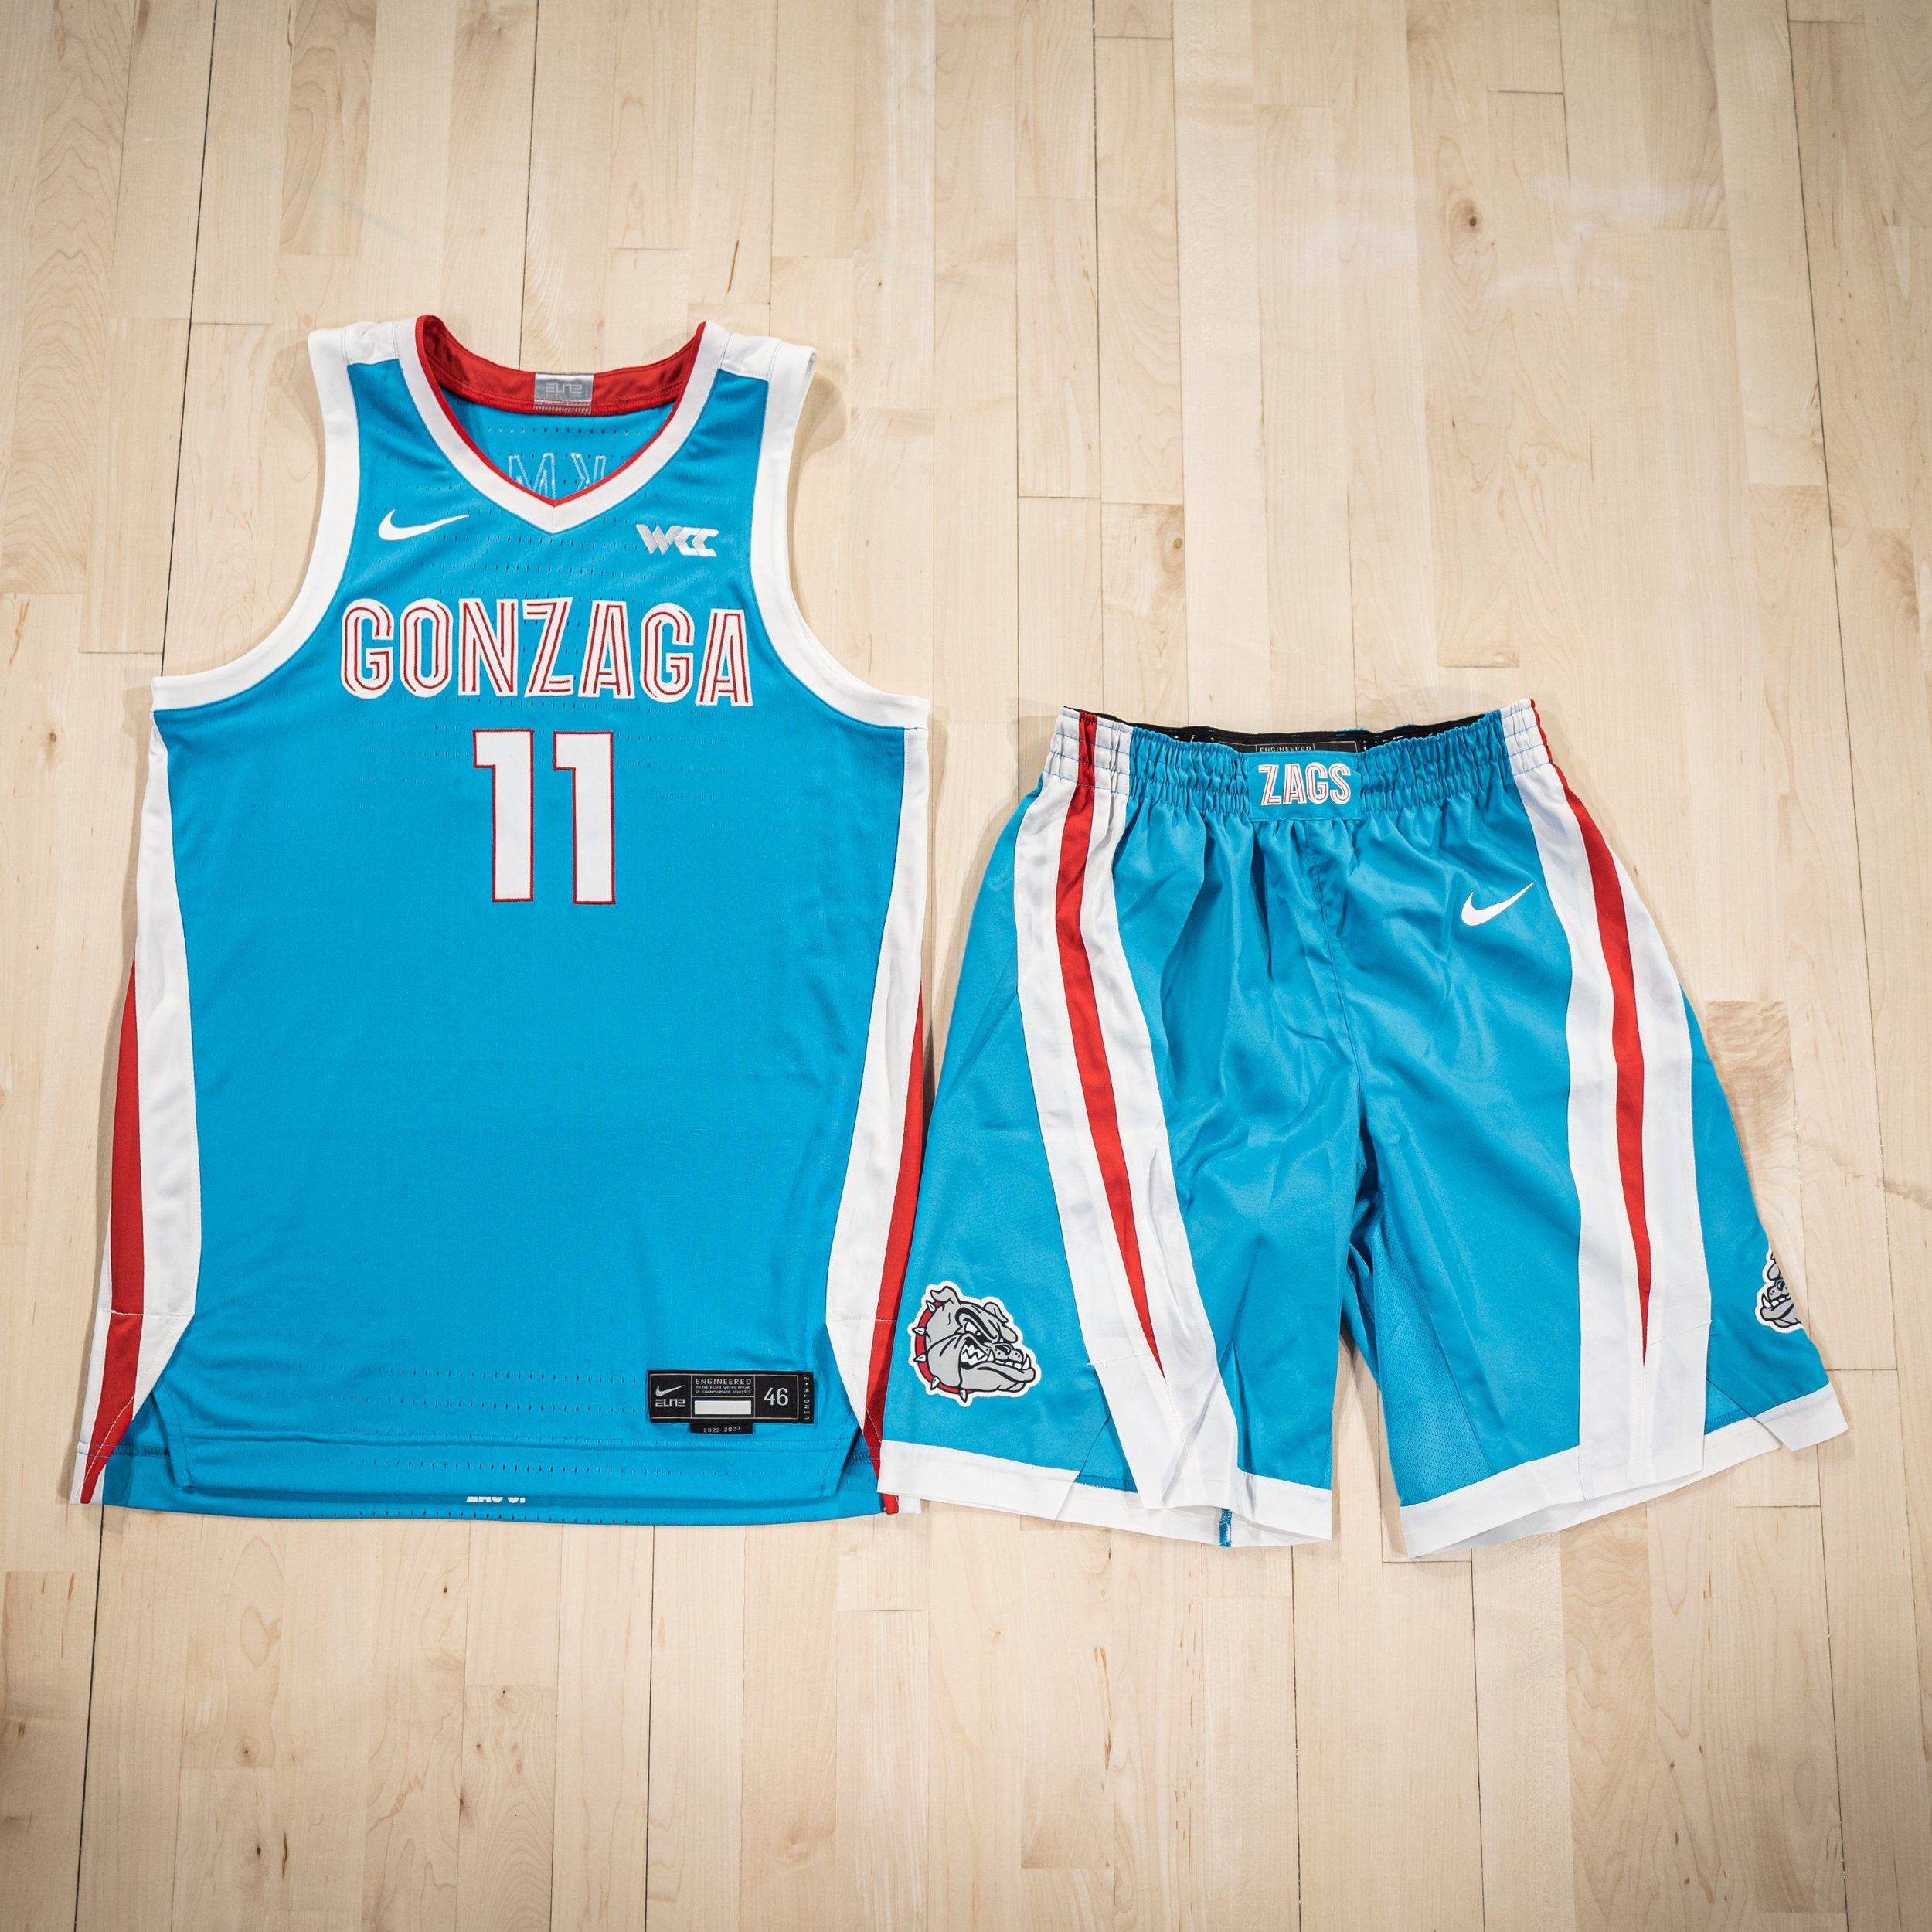 Suns honor Arizona's Native American tribes with new City Jersey